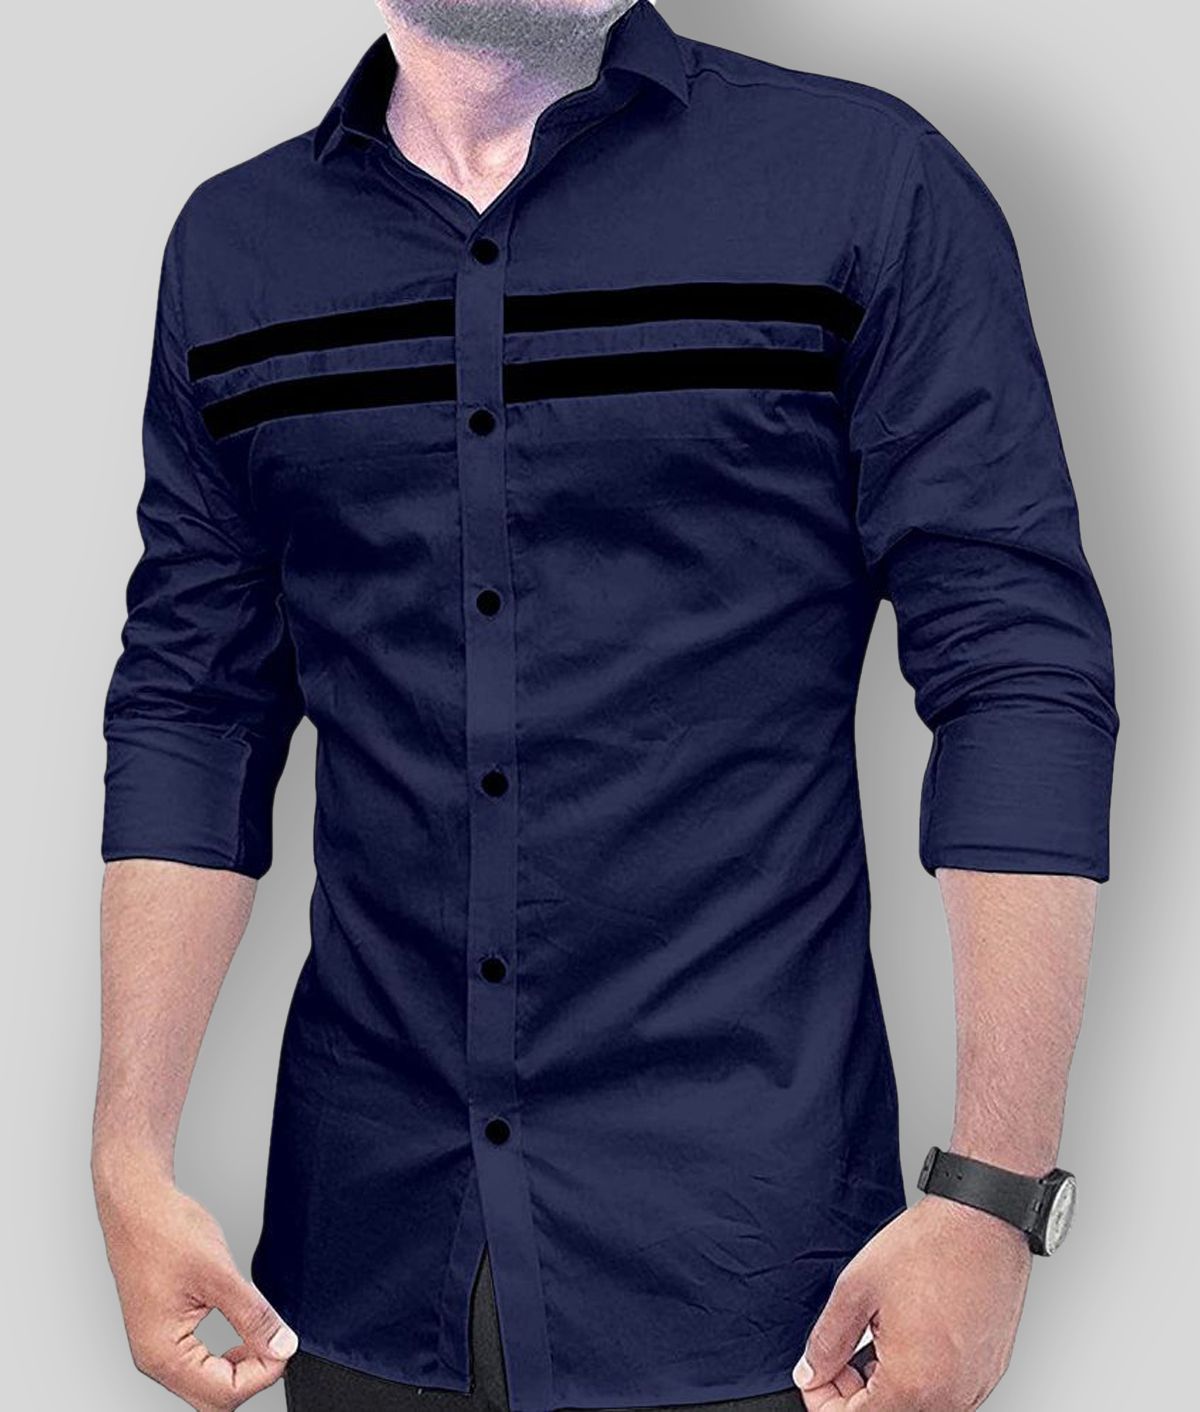     			VERTUSY Cotton Blend Regular Fit Striped Full Sleeves Men's Casual Shirt - Navy ( Pack of 1 )